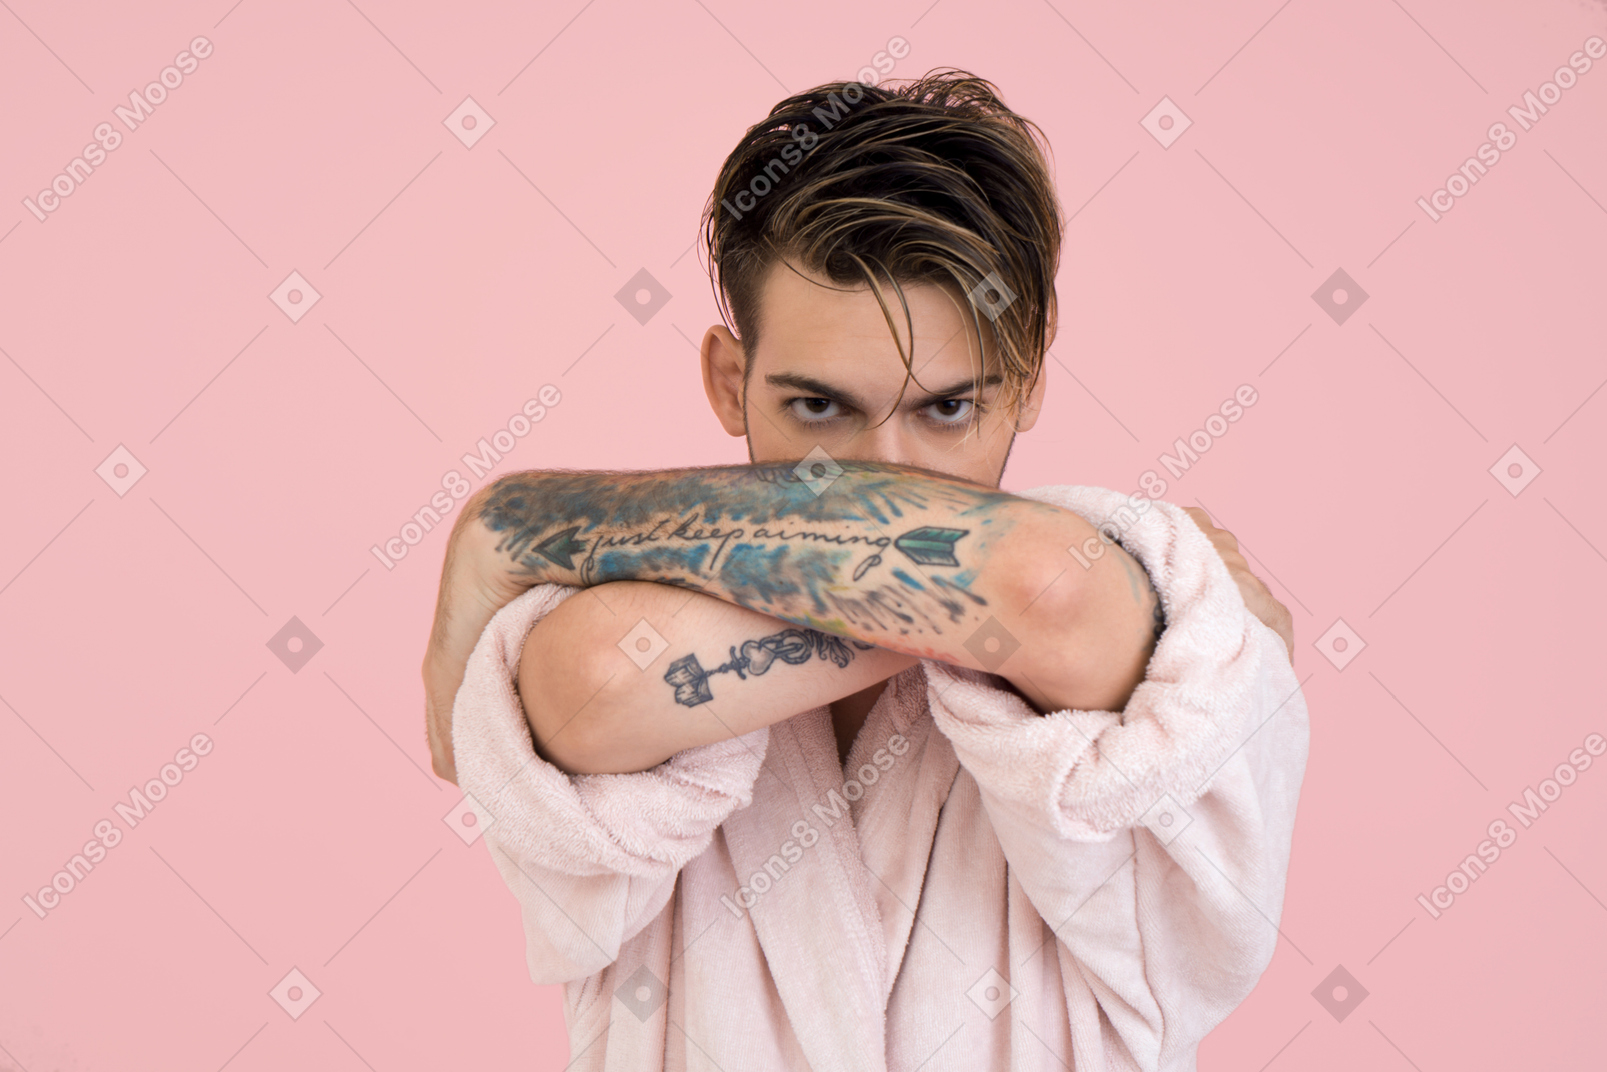 Good looking young man with tattoed arm